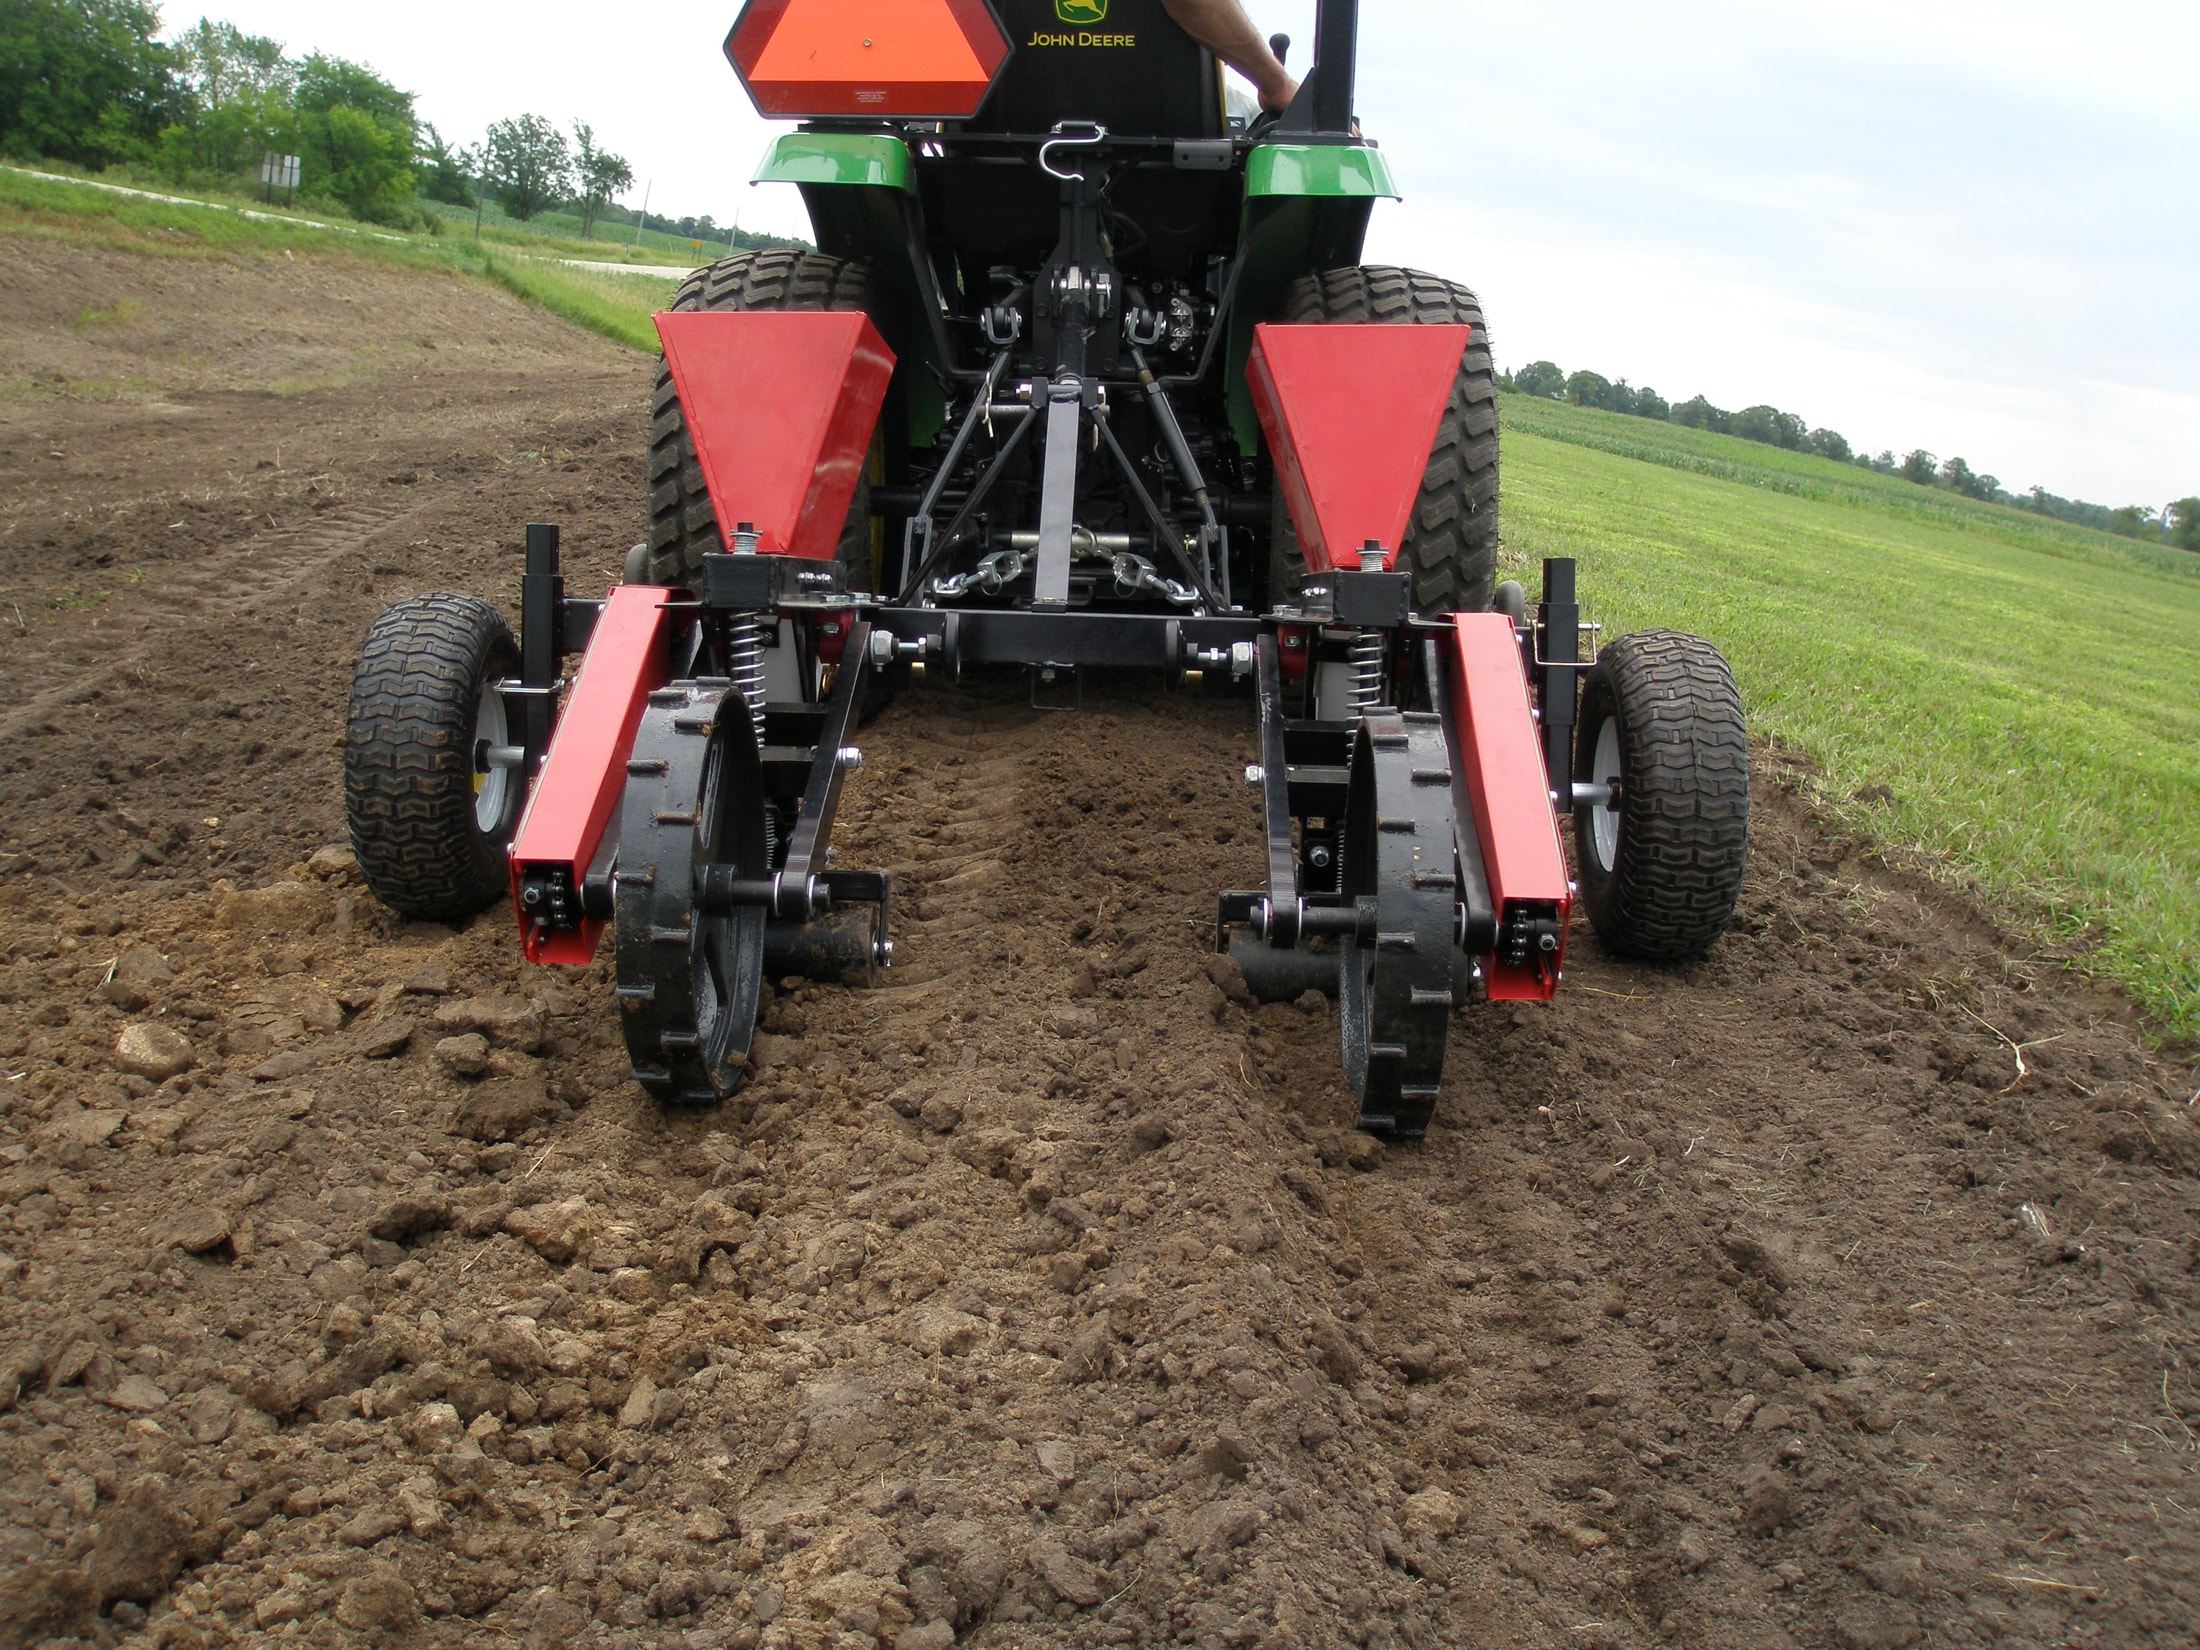 Field Tuff 3-Point Planter For Sale